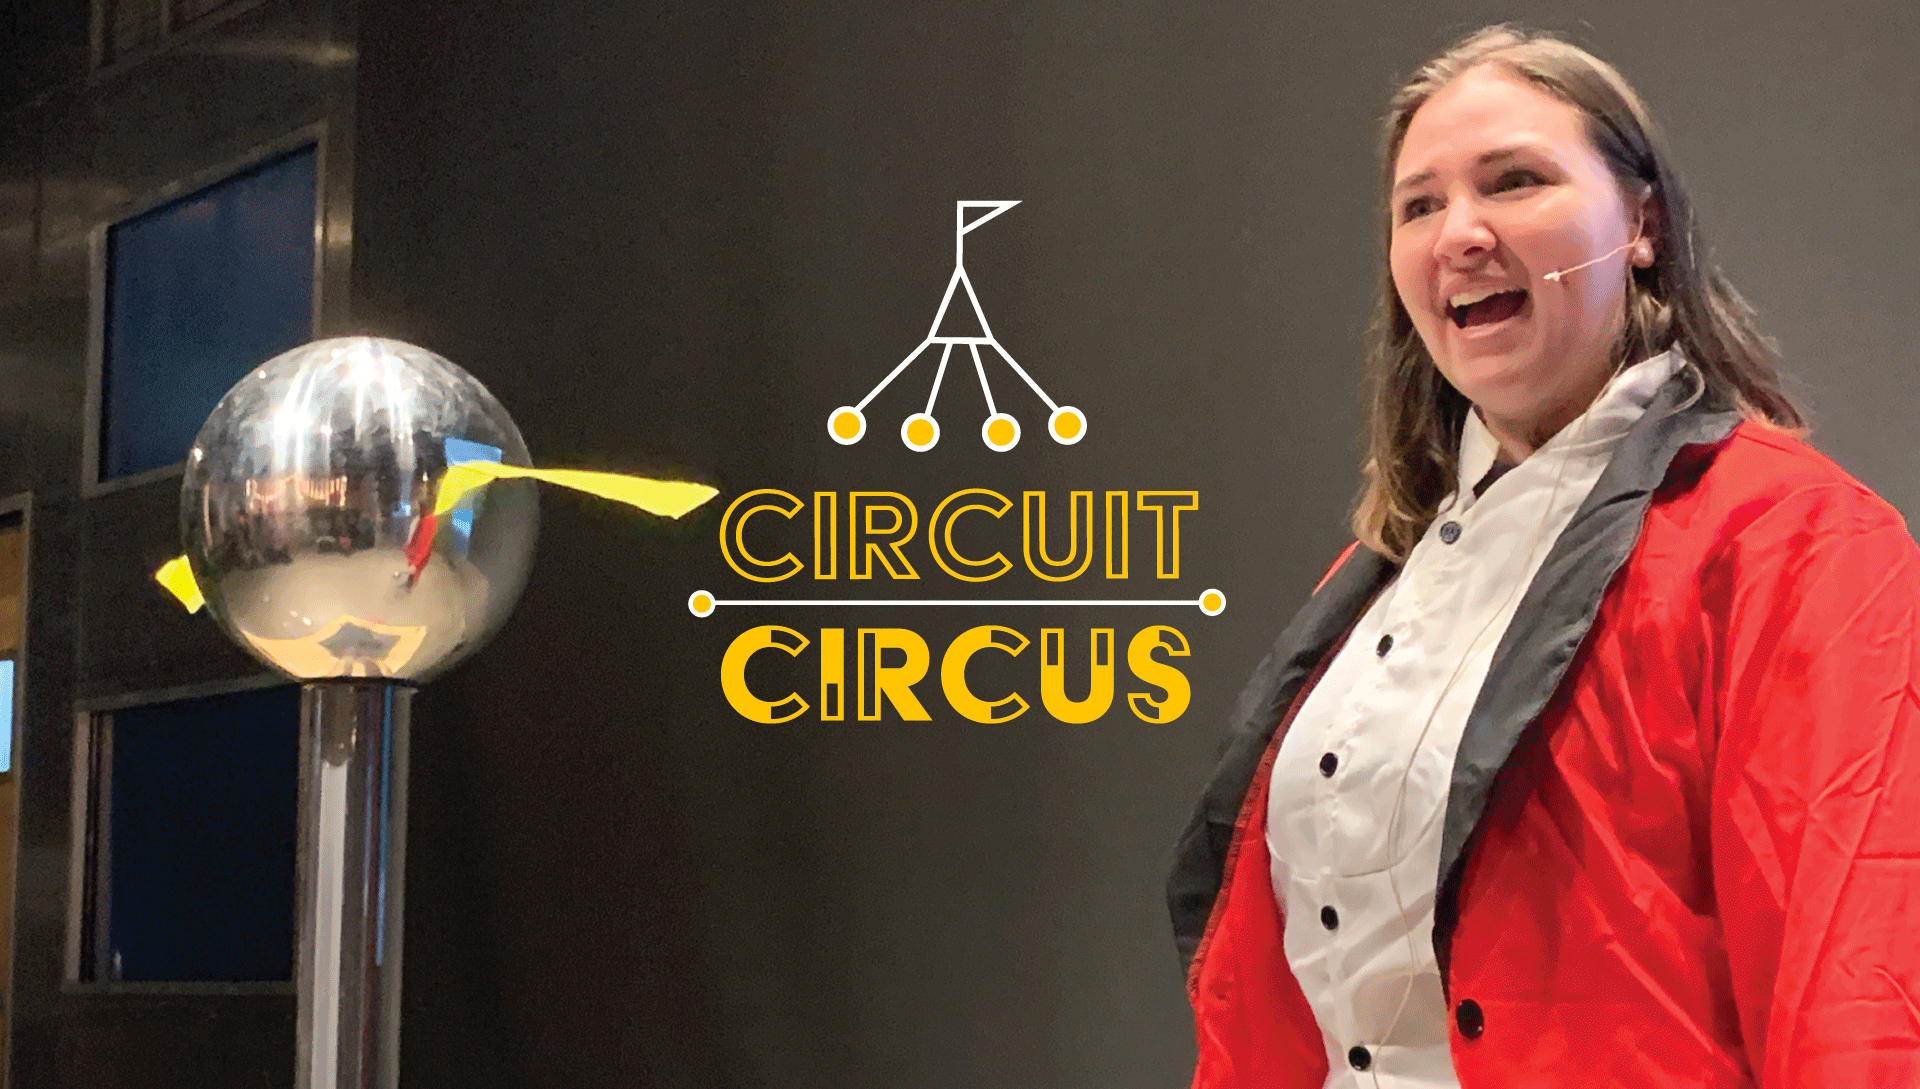 Image of an Educator in a red ring leader coat doing a demo with electricity. Image has "Circuit Circus" logo on top.